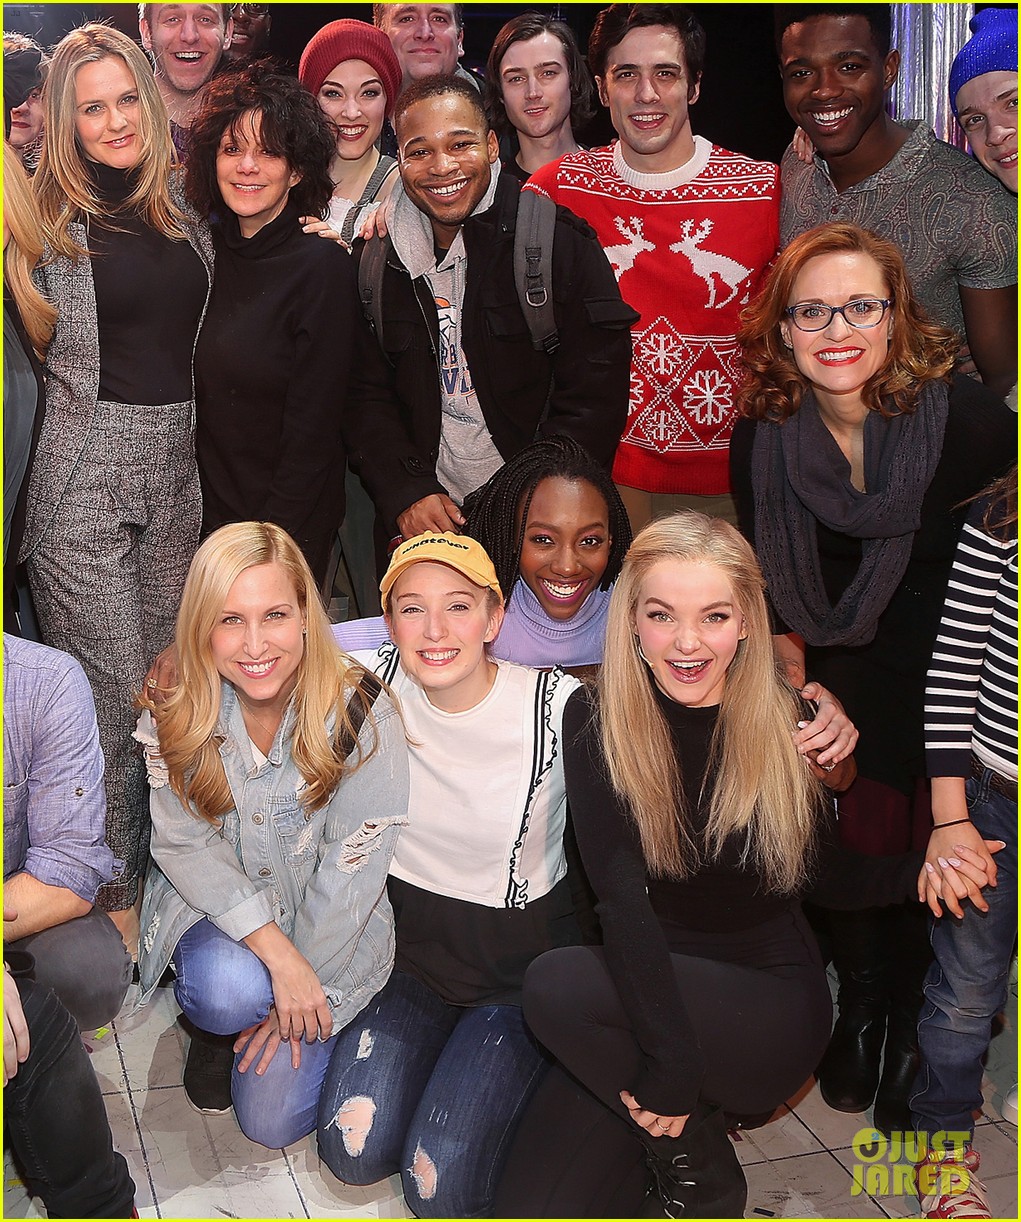 dove cameron meets alicia silverstone at clueless musical 04